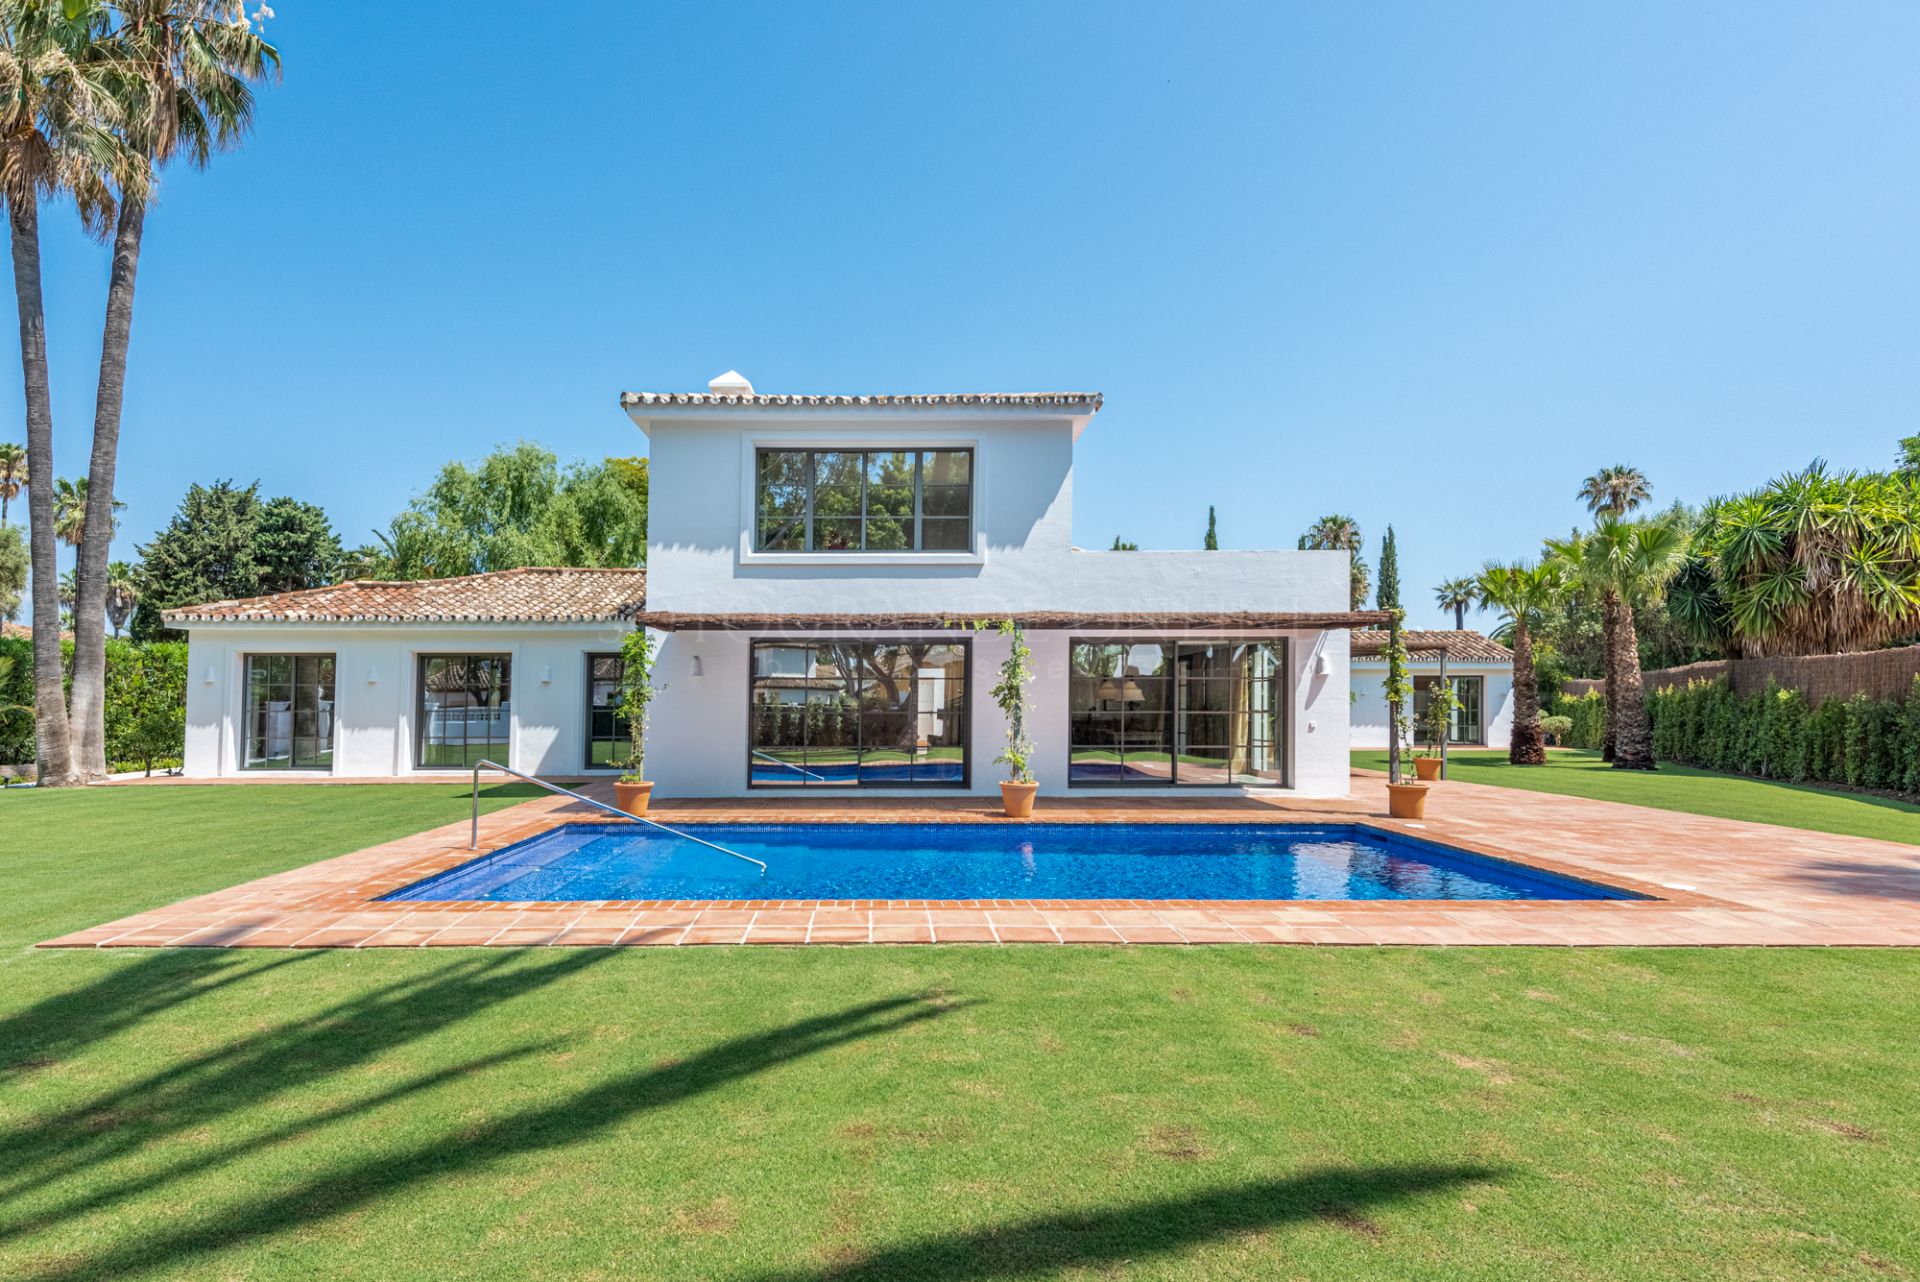 Magnificent fully renovated villa in Reyes y Reinas, one of the most sought-after areas of Sotogrande coast.